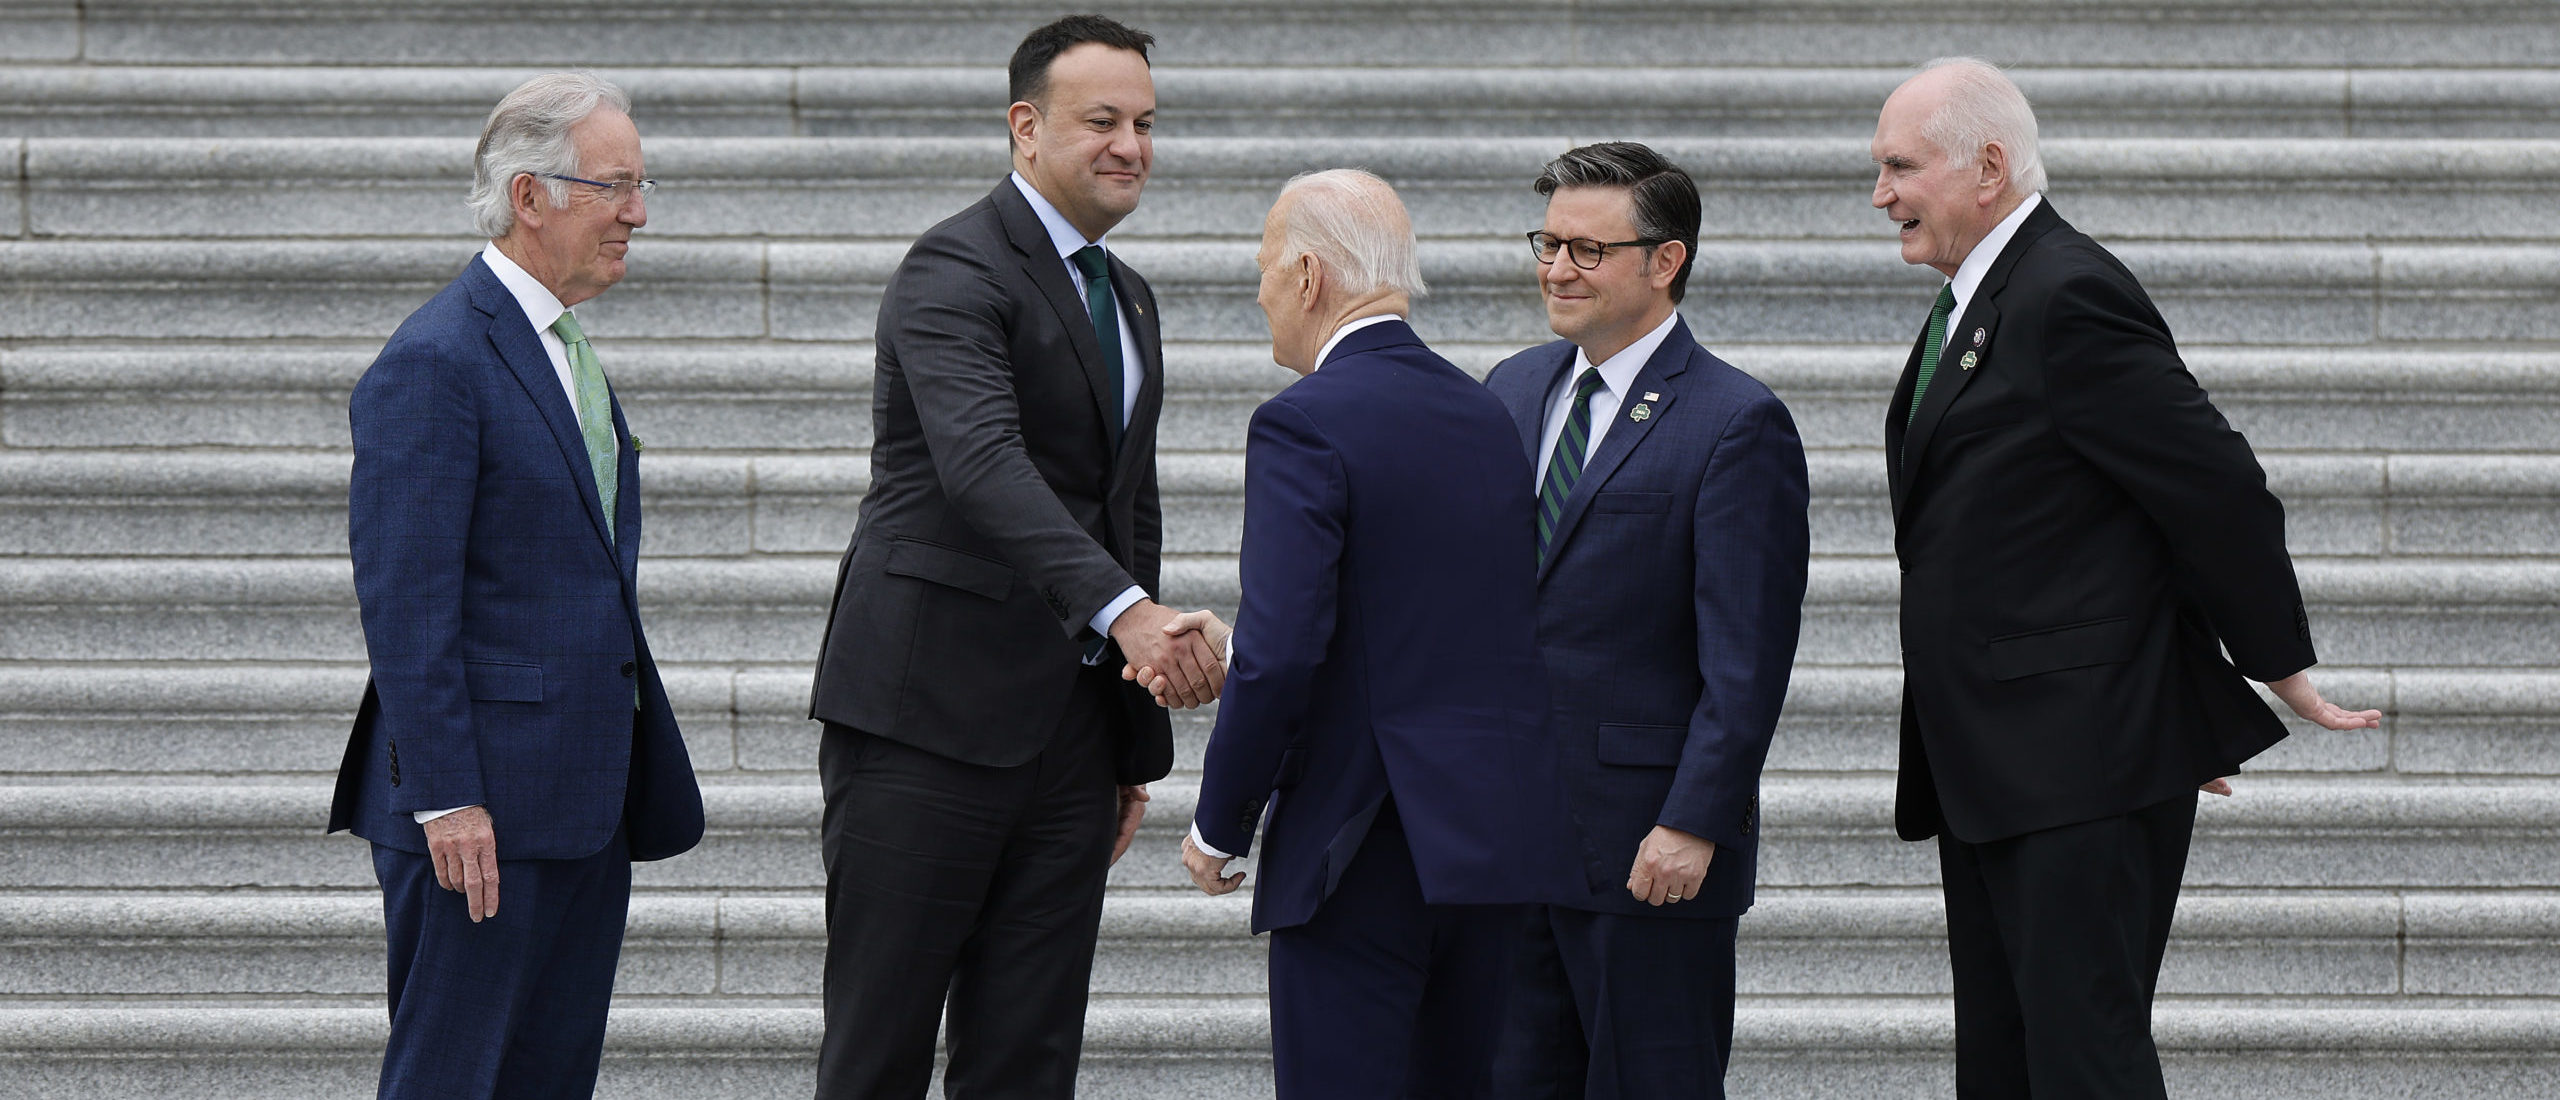 WASHINGTON, DC - MARCH 15: U.S. President Joe Biden (C) is greeted by (L-R) , Rep. Richard Neal (D-MA), Irish Taoiseach Leo Varadkar, Speaker of the House Mike Johnson (R-LA) and Rep. Mike Kelly (R-PA) as the president arrives at the U.S. Capitol on March 15, 2023 in Washington, DC. Biden joined Varadkar and members of Congress for the traditional St. Patrick's Day Friends of Ireland luncheon. The Friends of Ireland caucus was founded in 1981 by the late Irish-American politicians Sen. Ted Kennedy (D-MA), Sen. Daniel Moynihan (D-NY) and former Speaker of the House Tip O’Neill (D-MA) to help broker peace and reconciliation in Northern Ireland. (Photo by Chip Somodevilla/Getty Images)